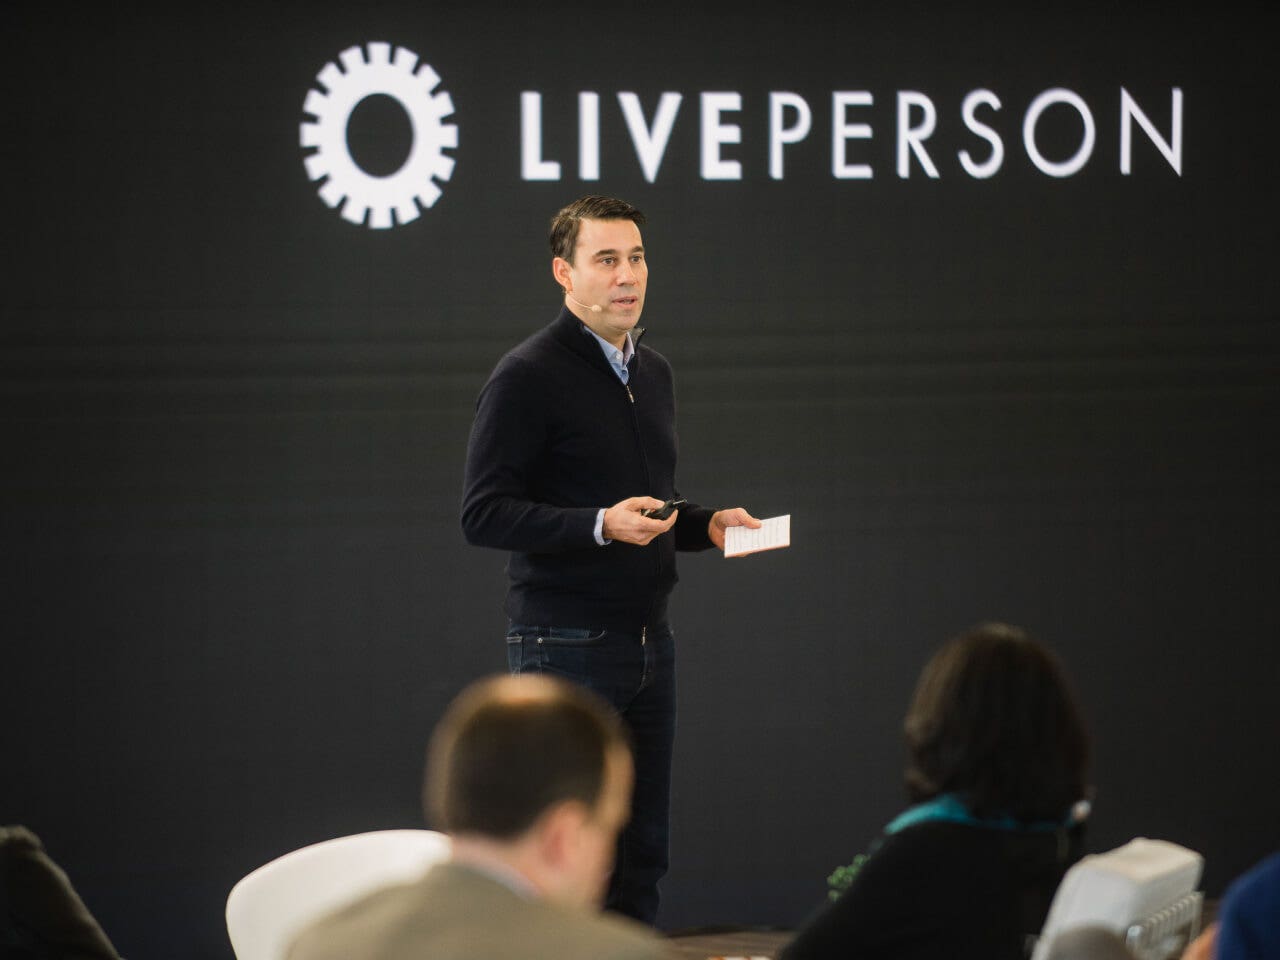 LivePerson Shares Will Likely Be Range-Bound Pending Sales Representative Productivity Boost, Analyst Says